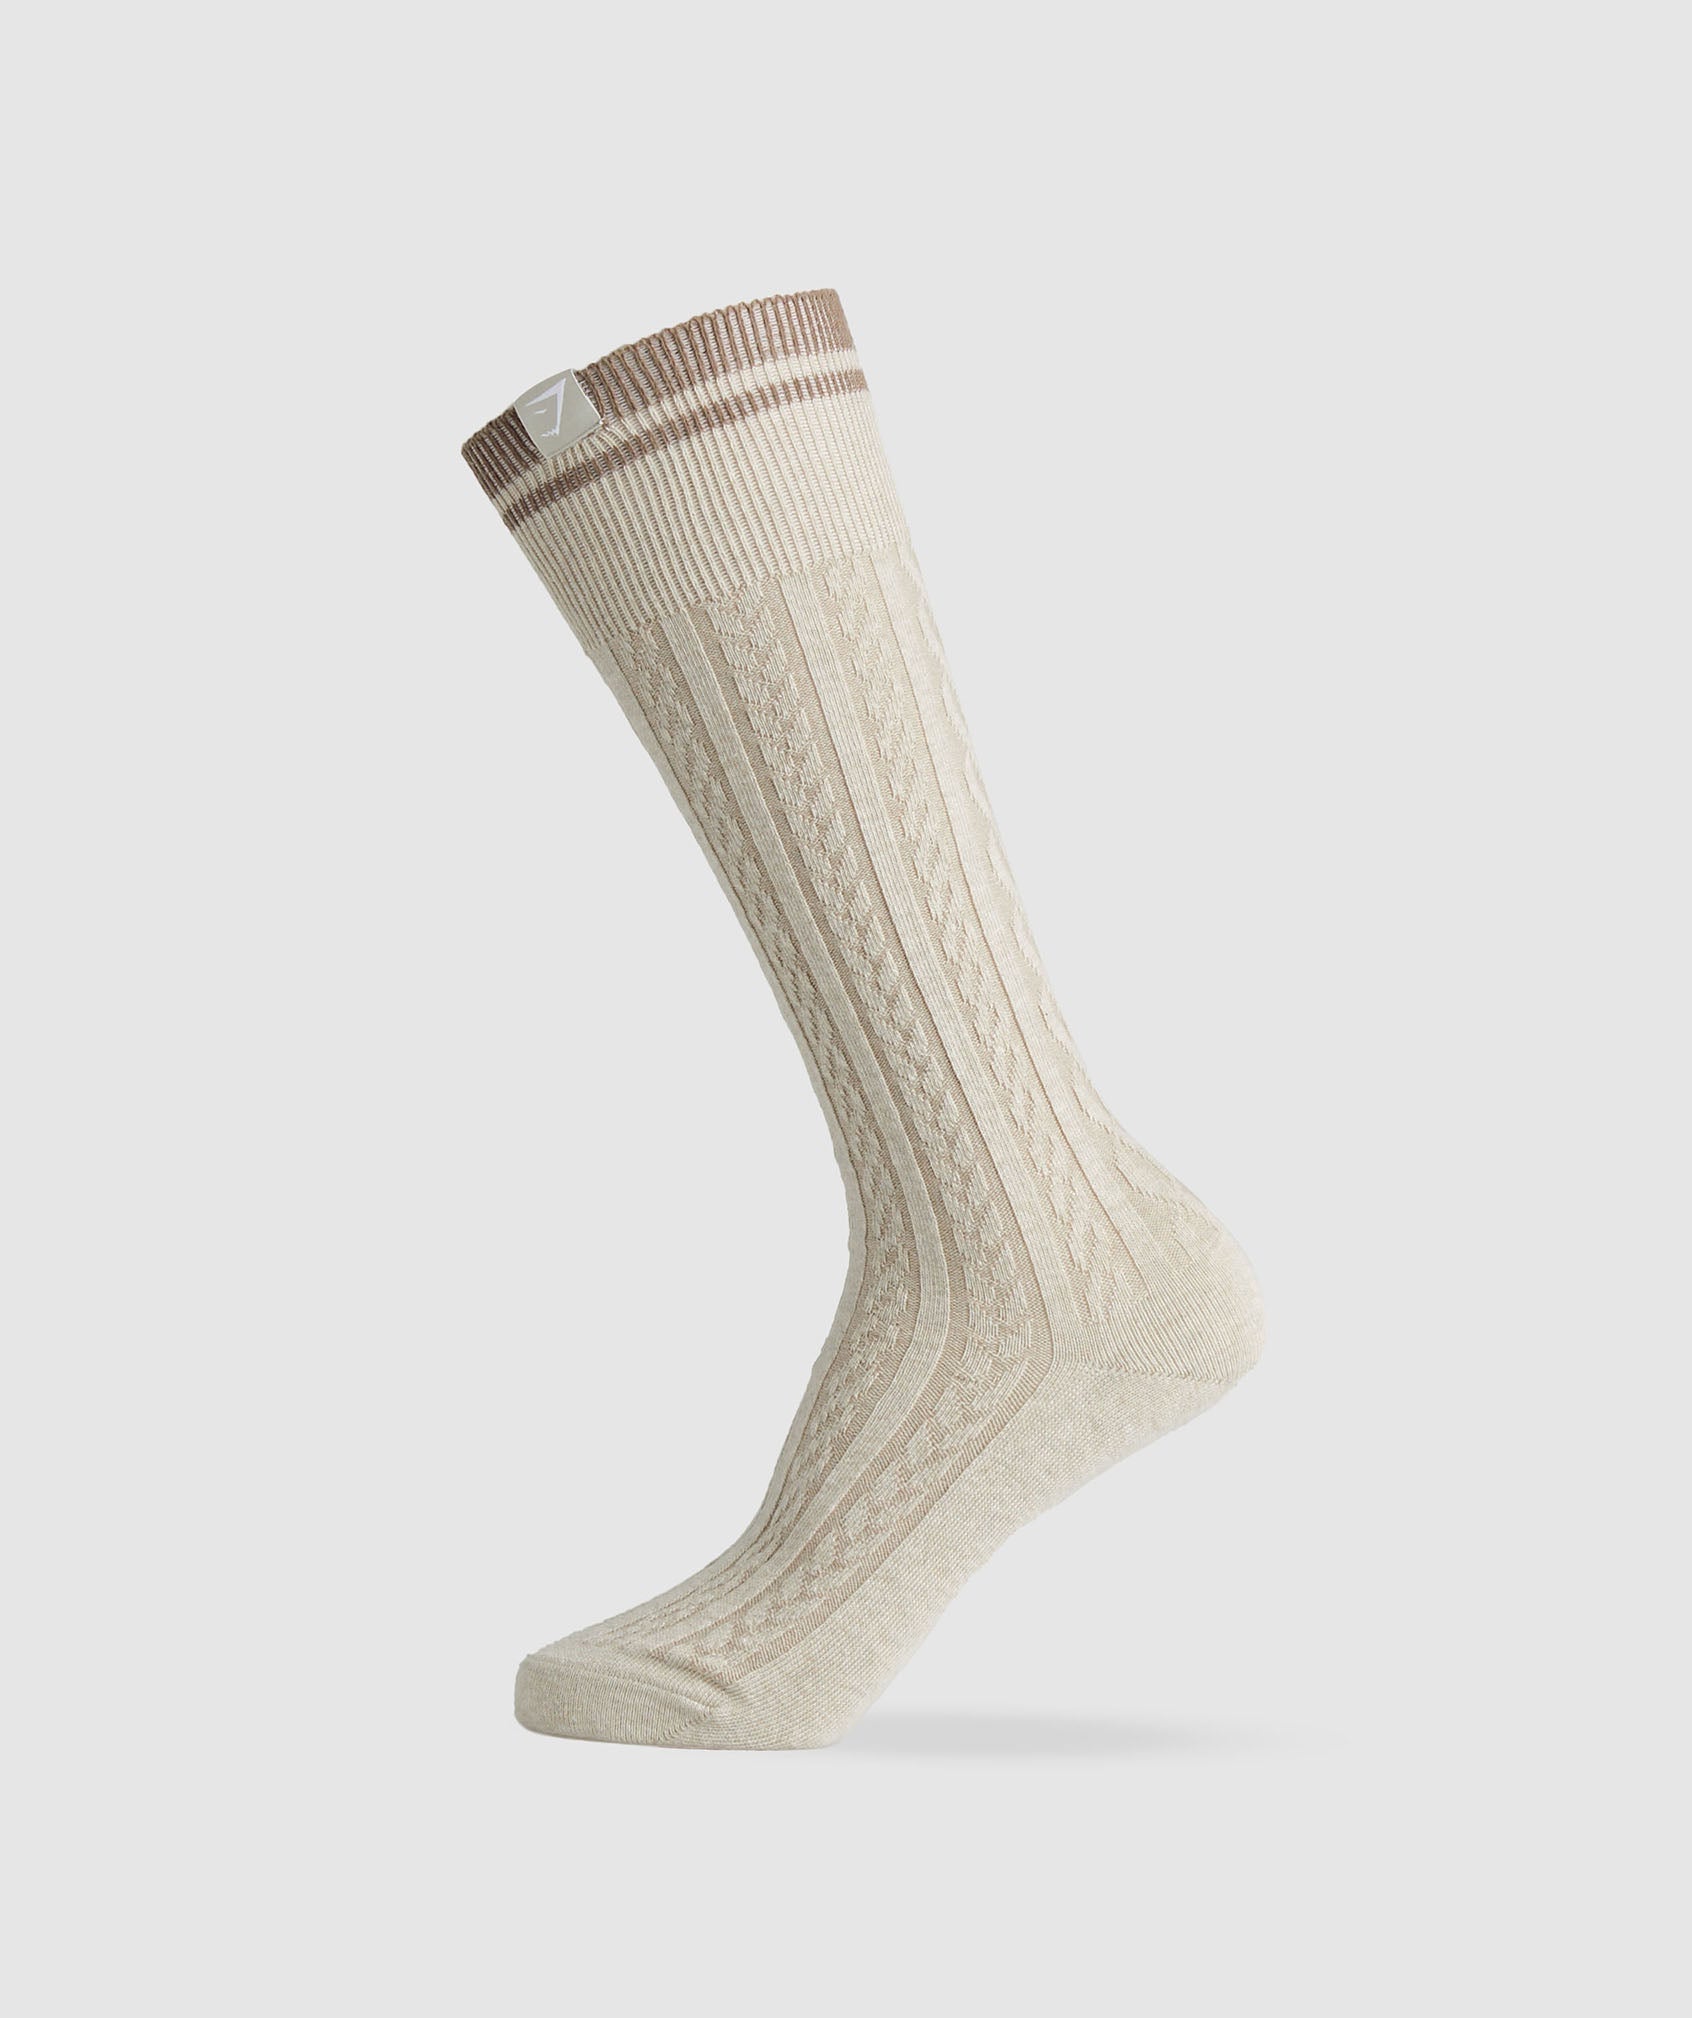 Rest Day Cable Socks in Stone Brown